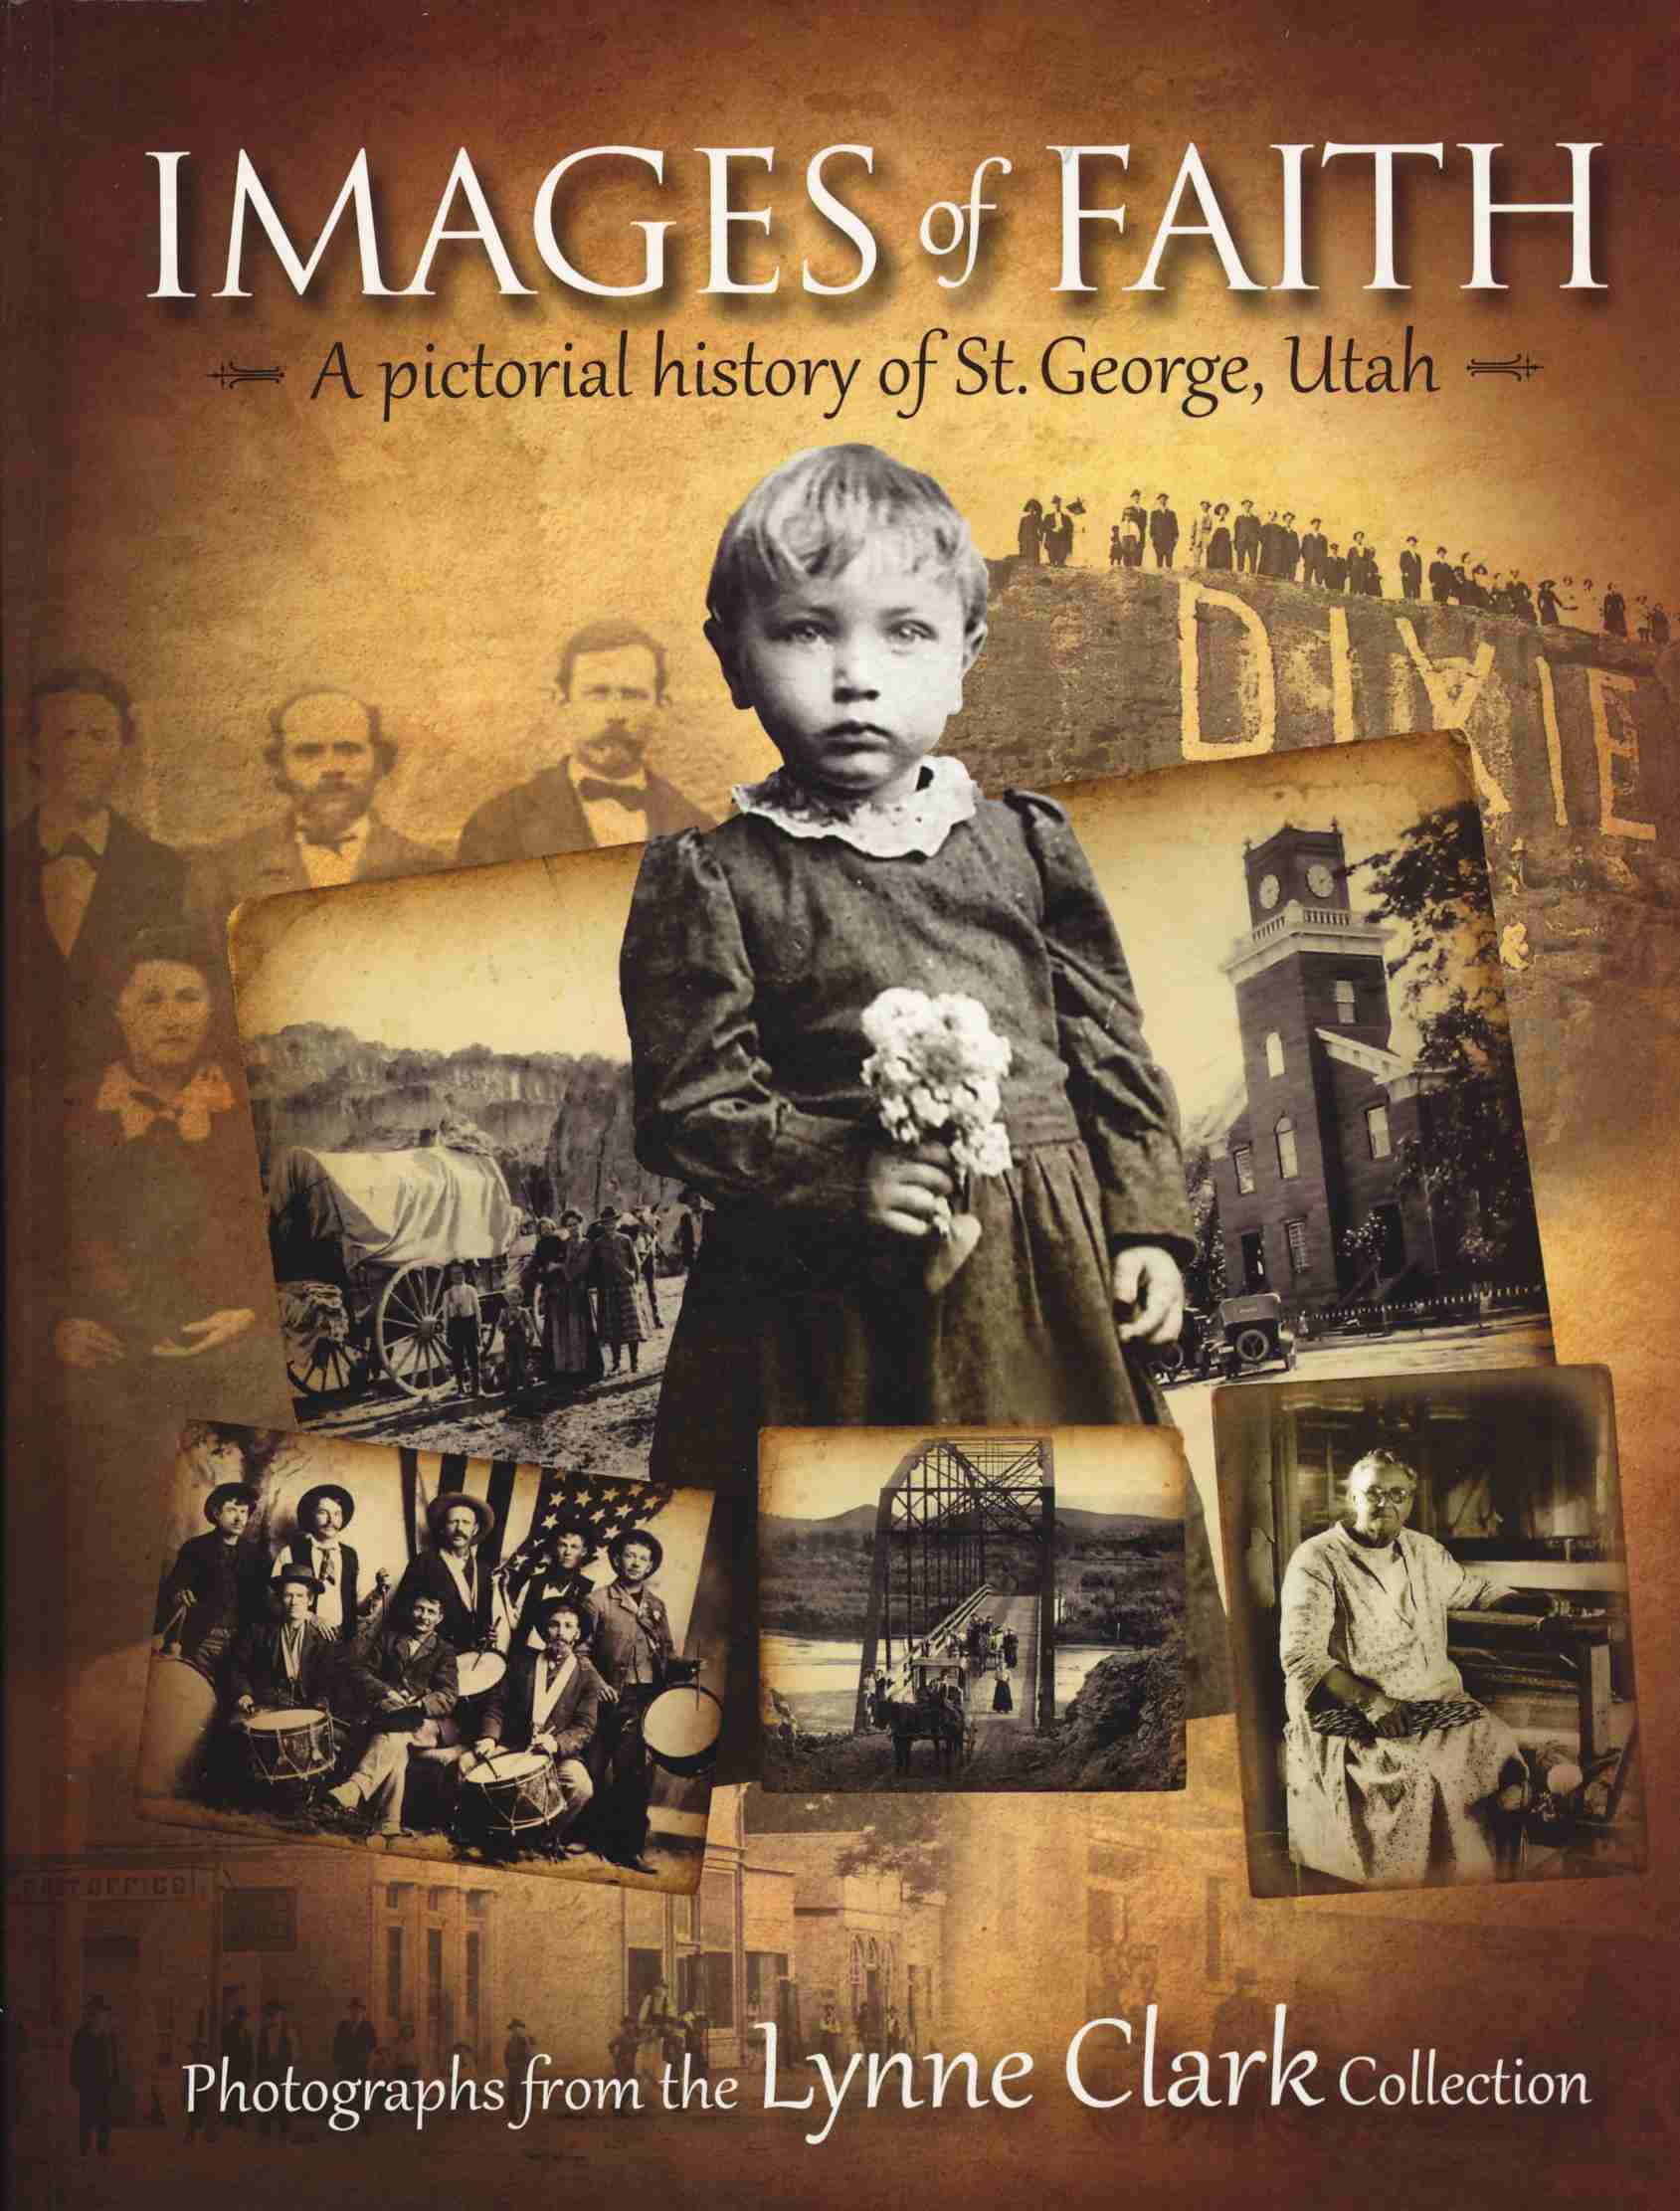 Book: Images of Faith: A Pictorial History of St. George, Utah